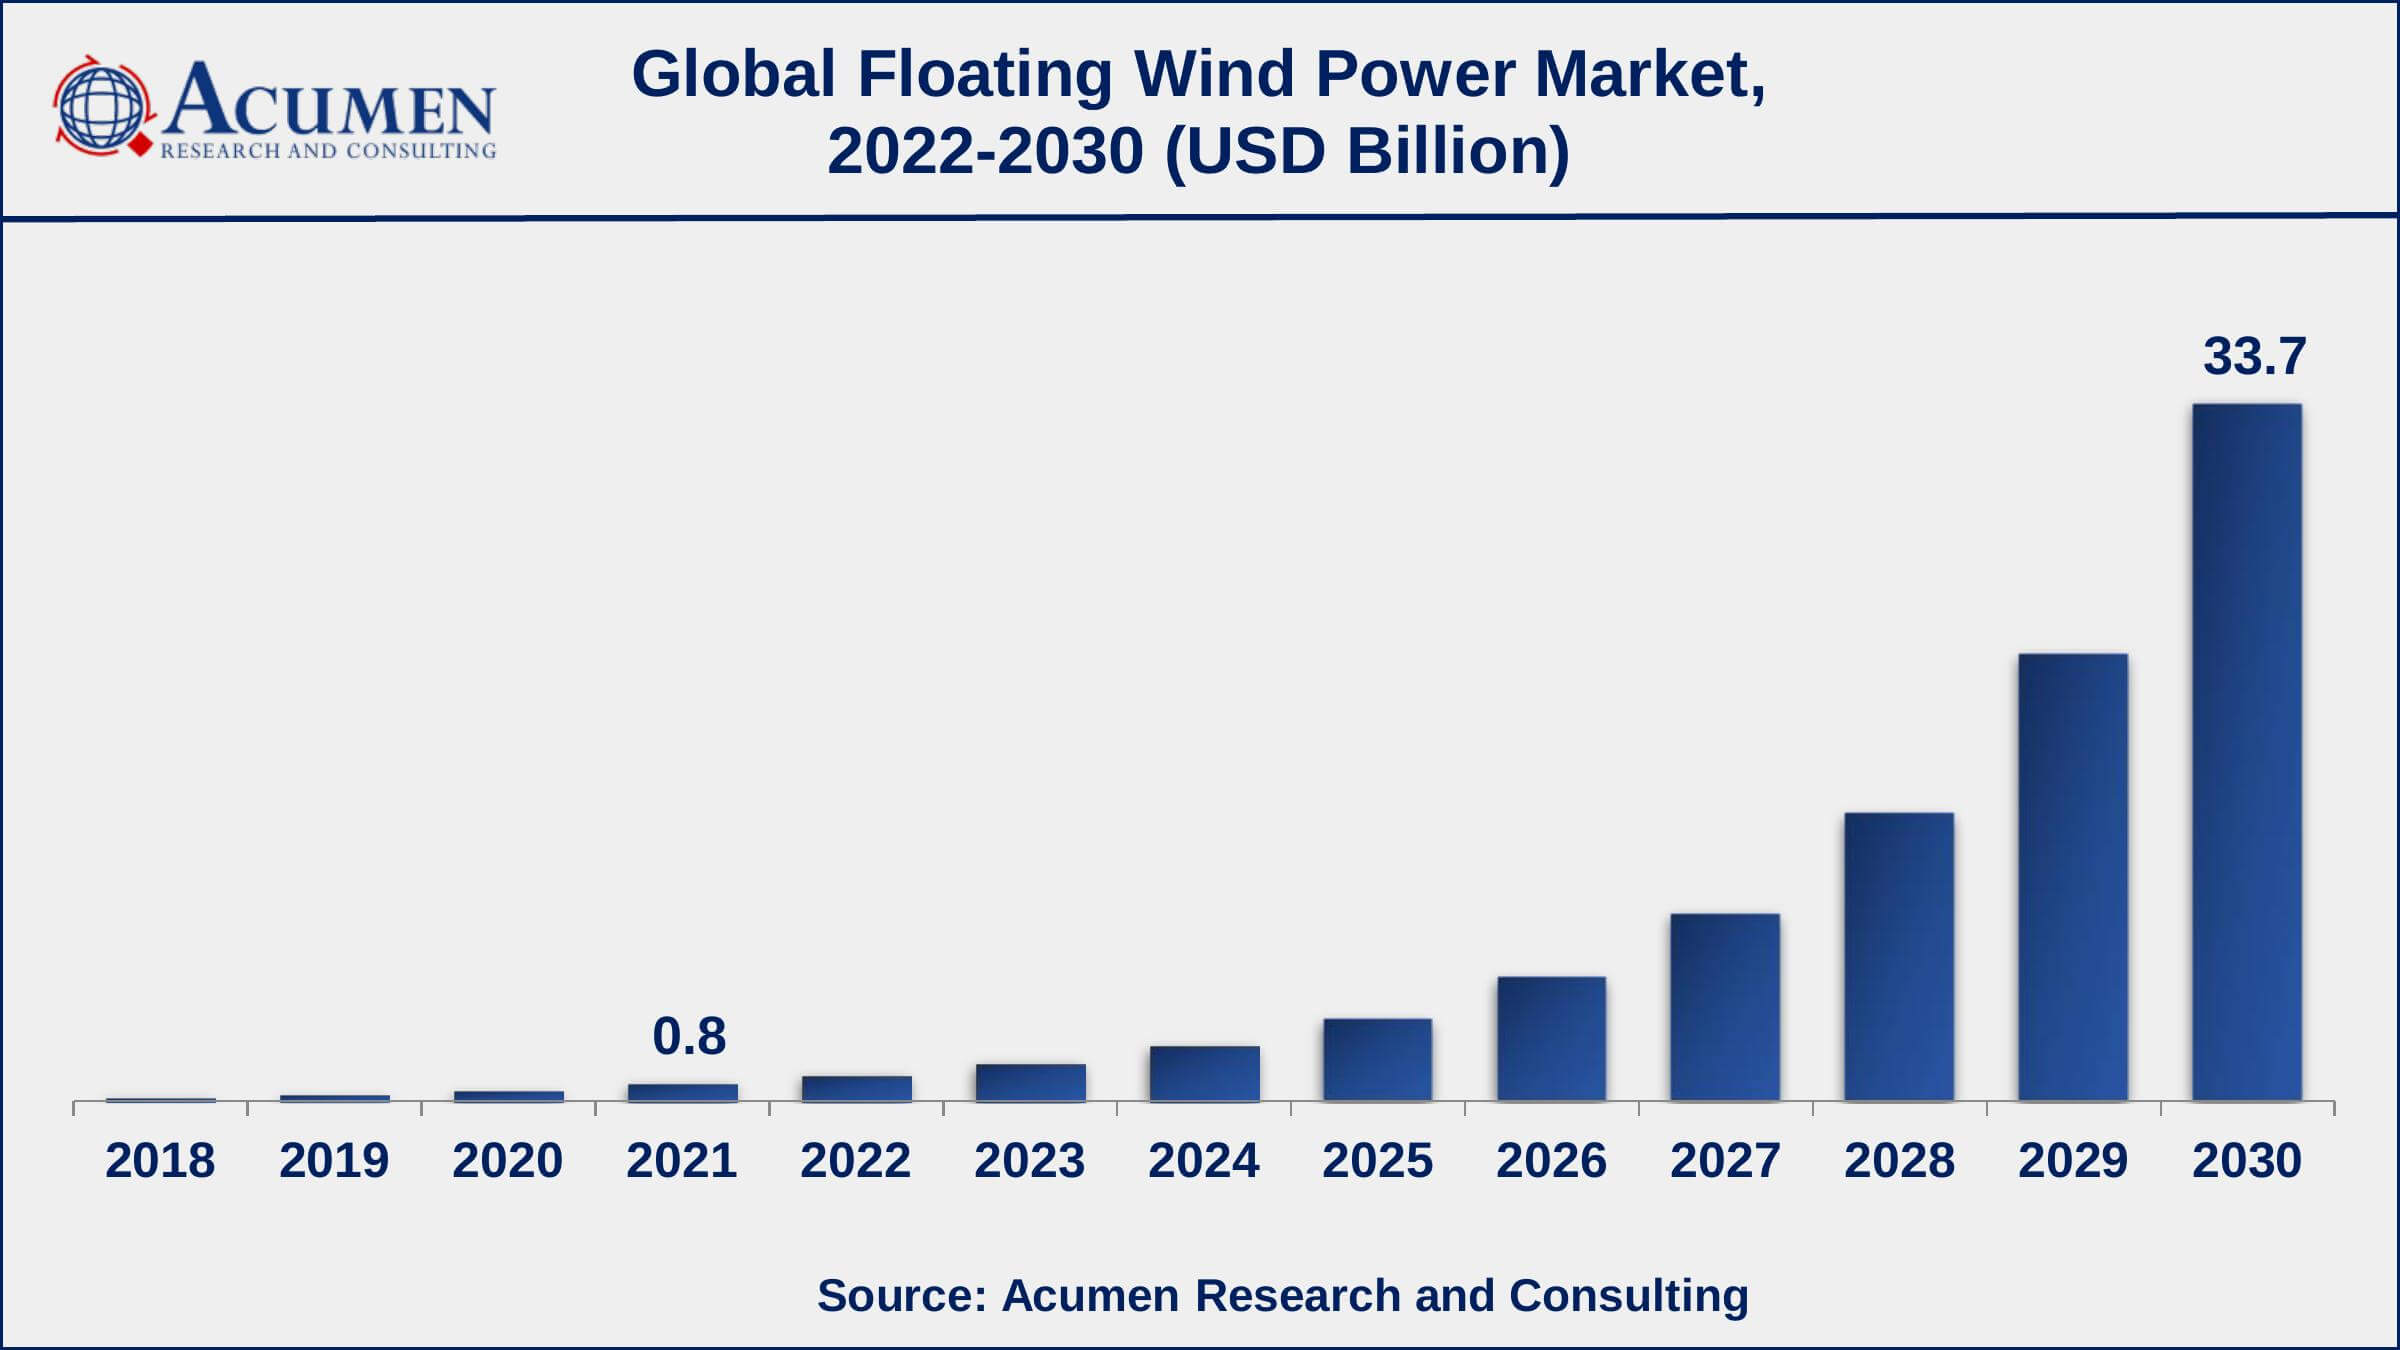 Asia-Pacific floating wind power market growth will record noteworthy CAGR from 2022 to 2030